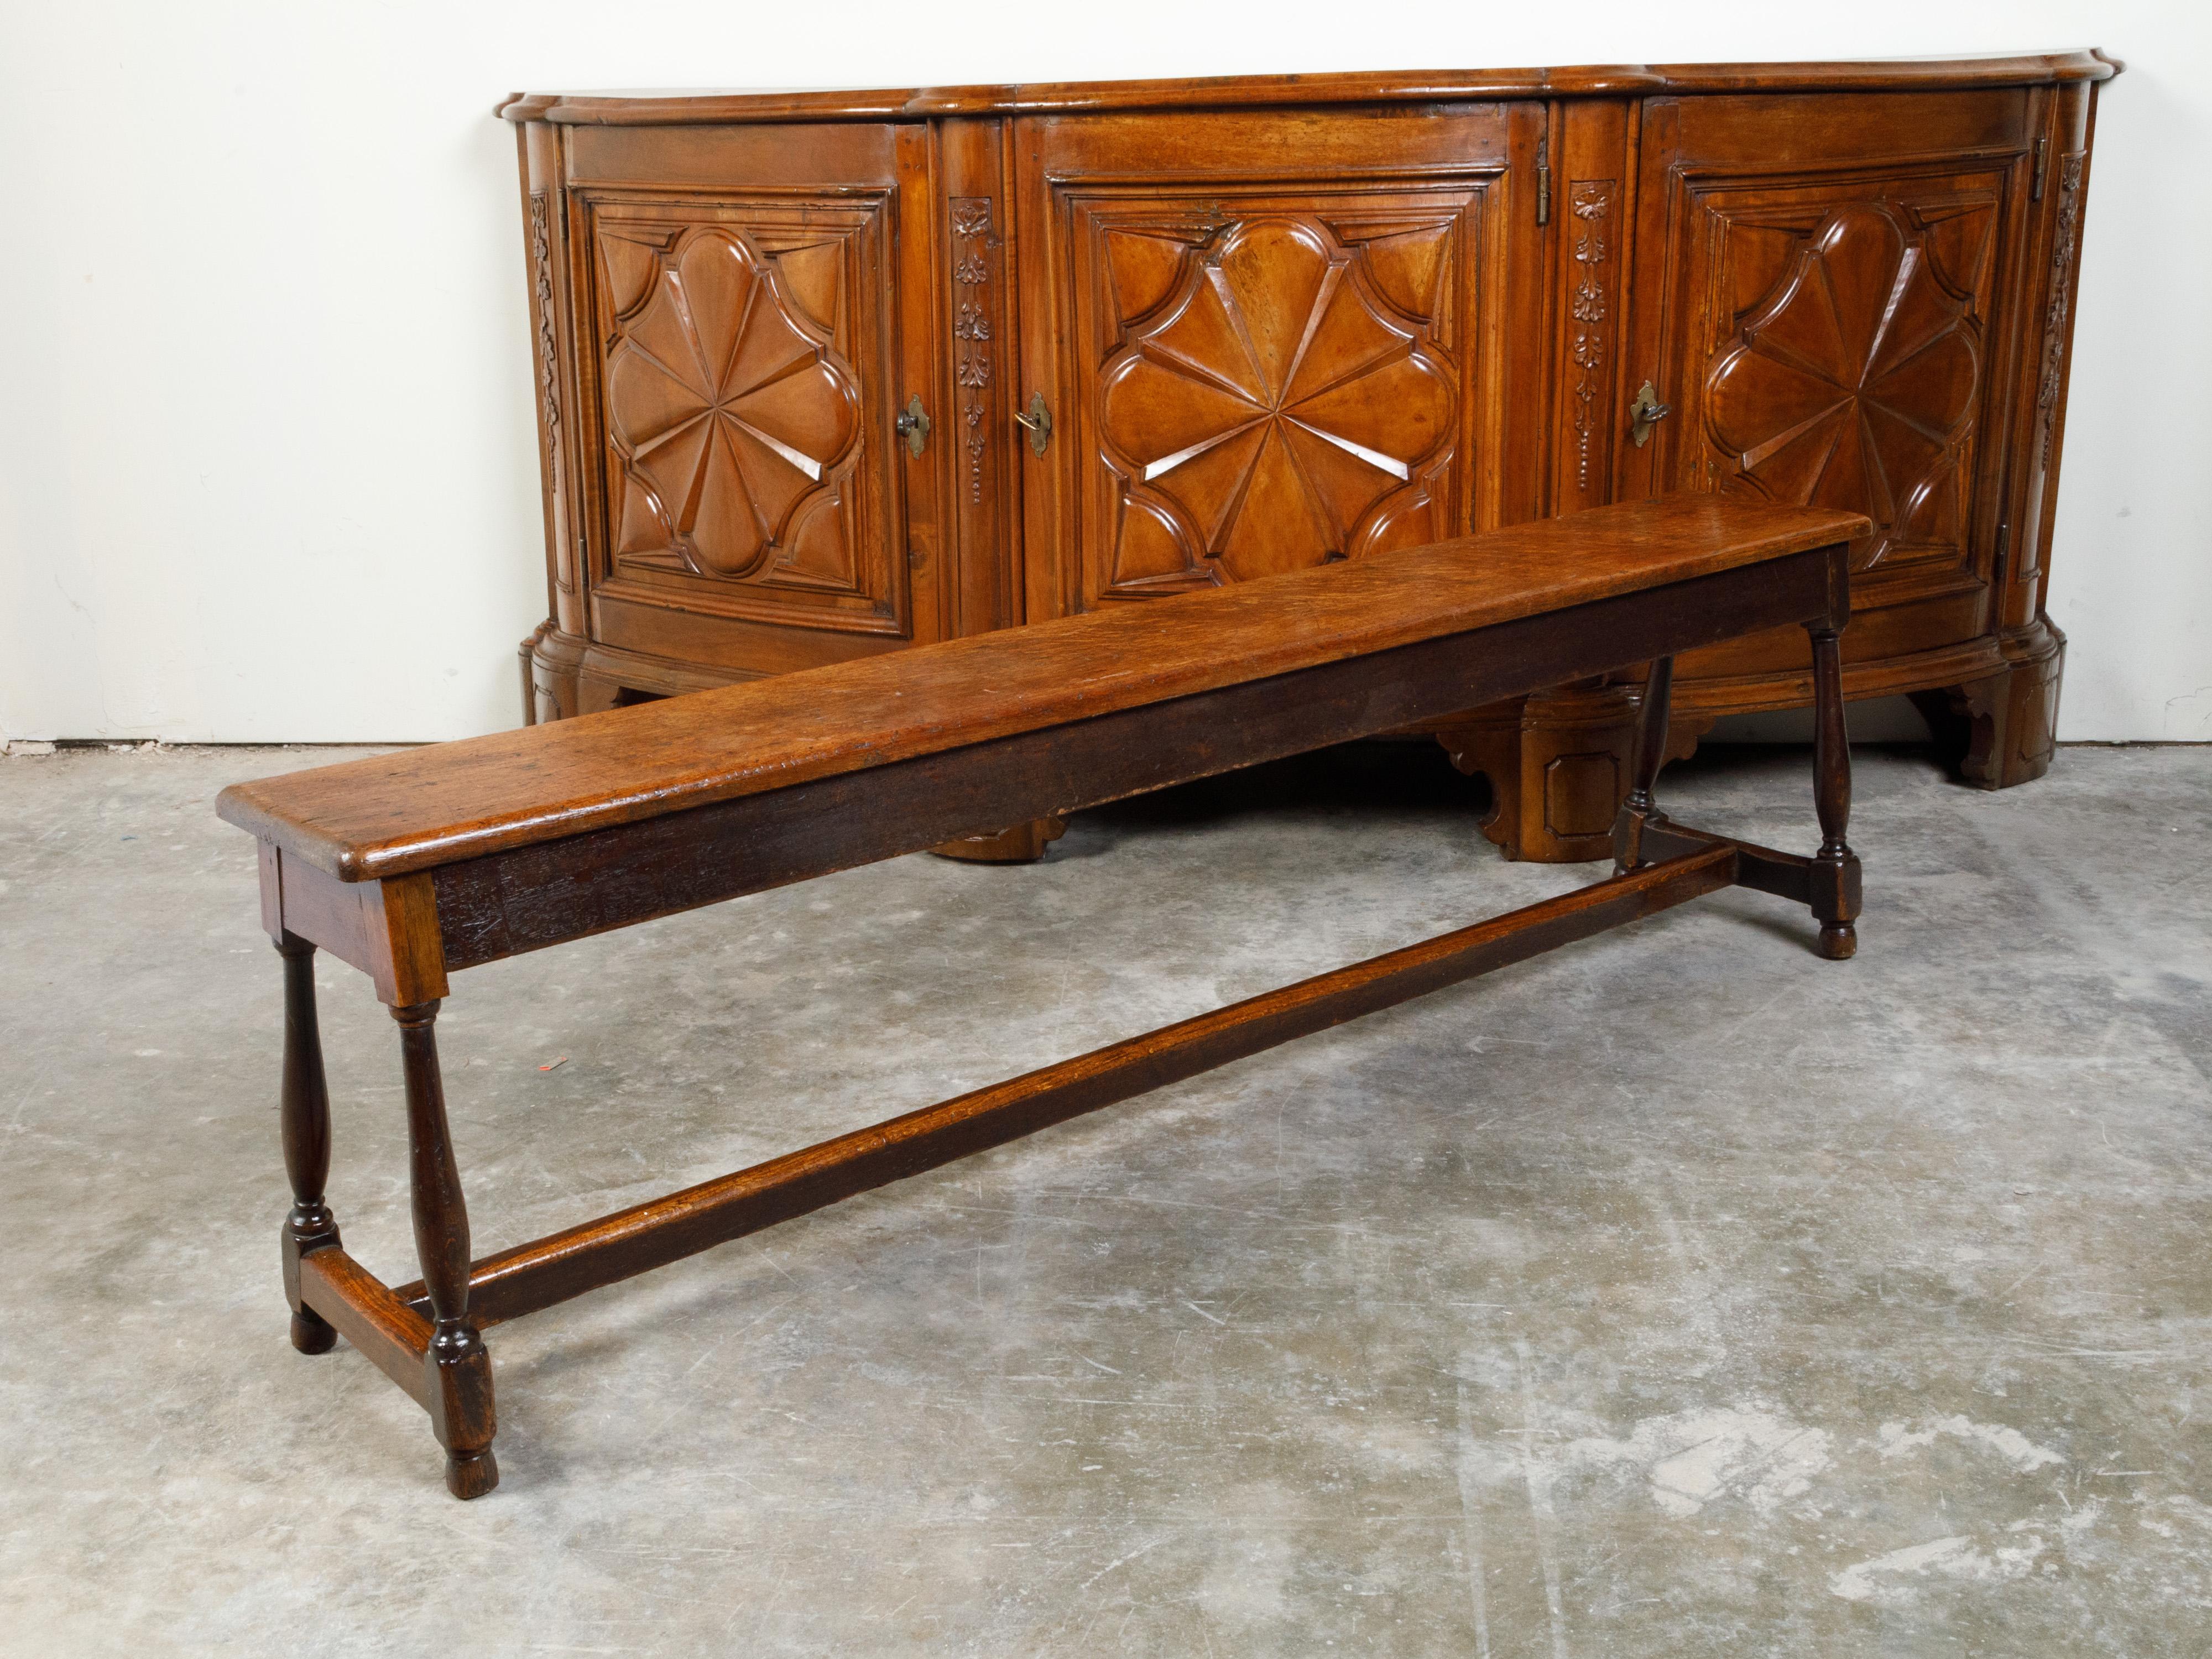 English 1900s Turn of the Century Oak Bench with Splaying Column-Shaped Legs 2